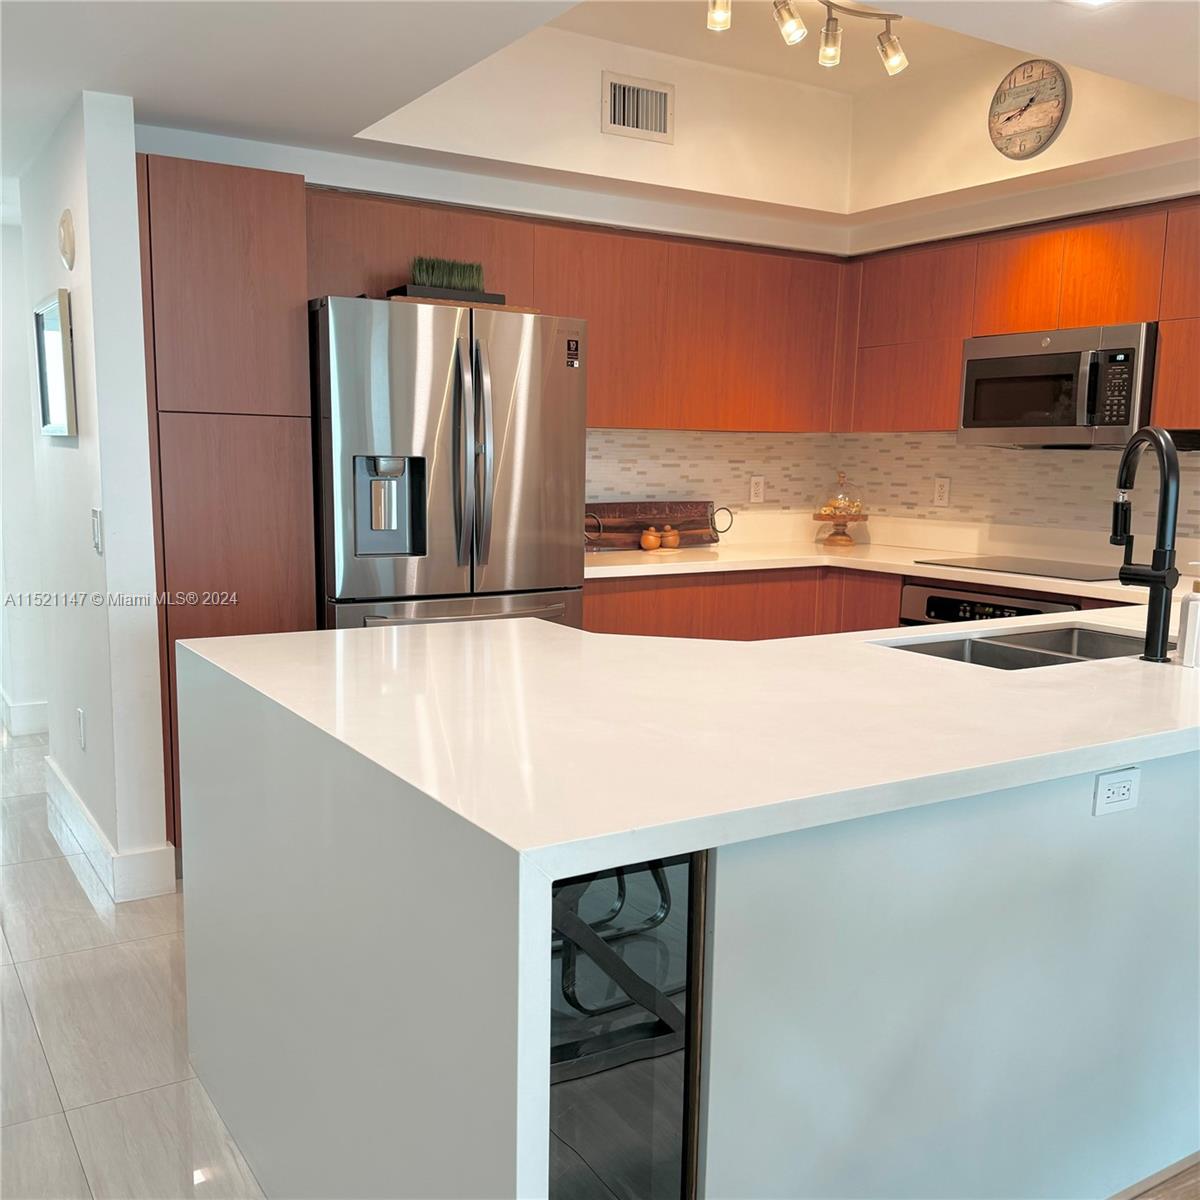 a kitchen with stainless steel appliances a refrigerator and stove